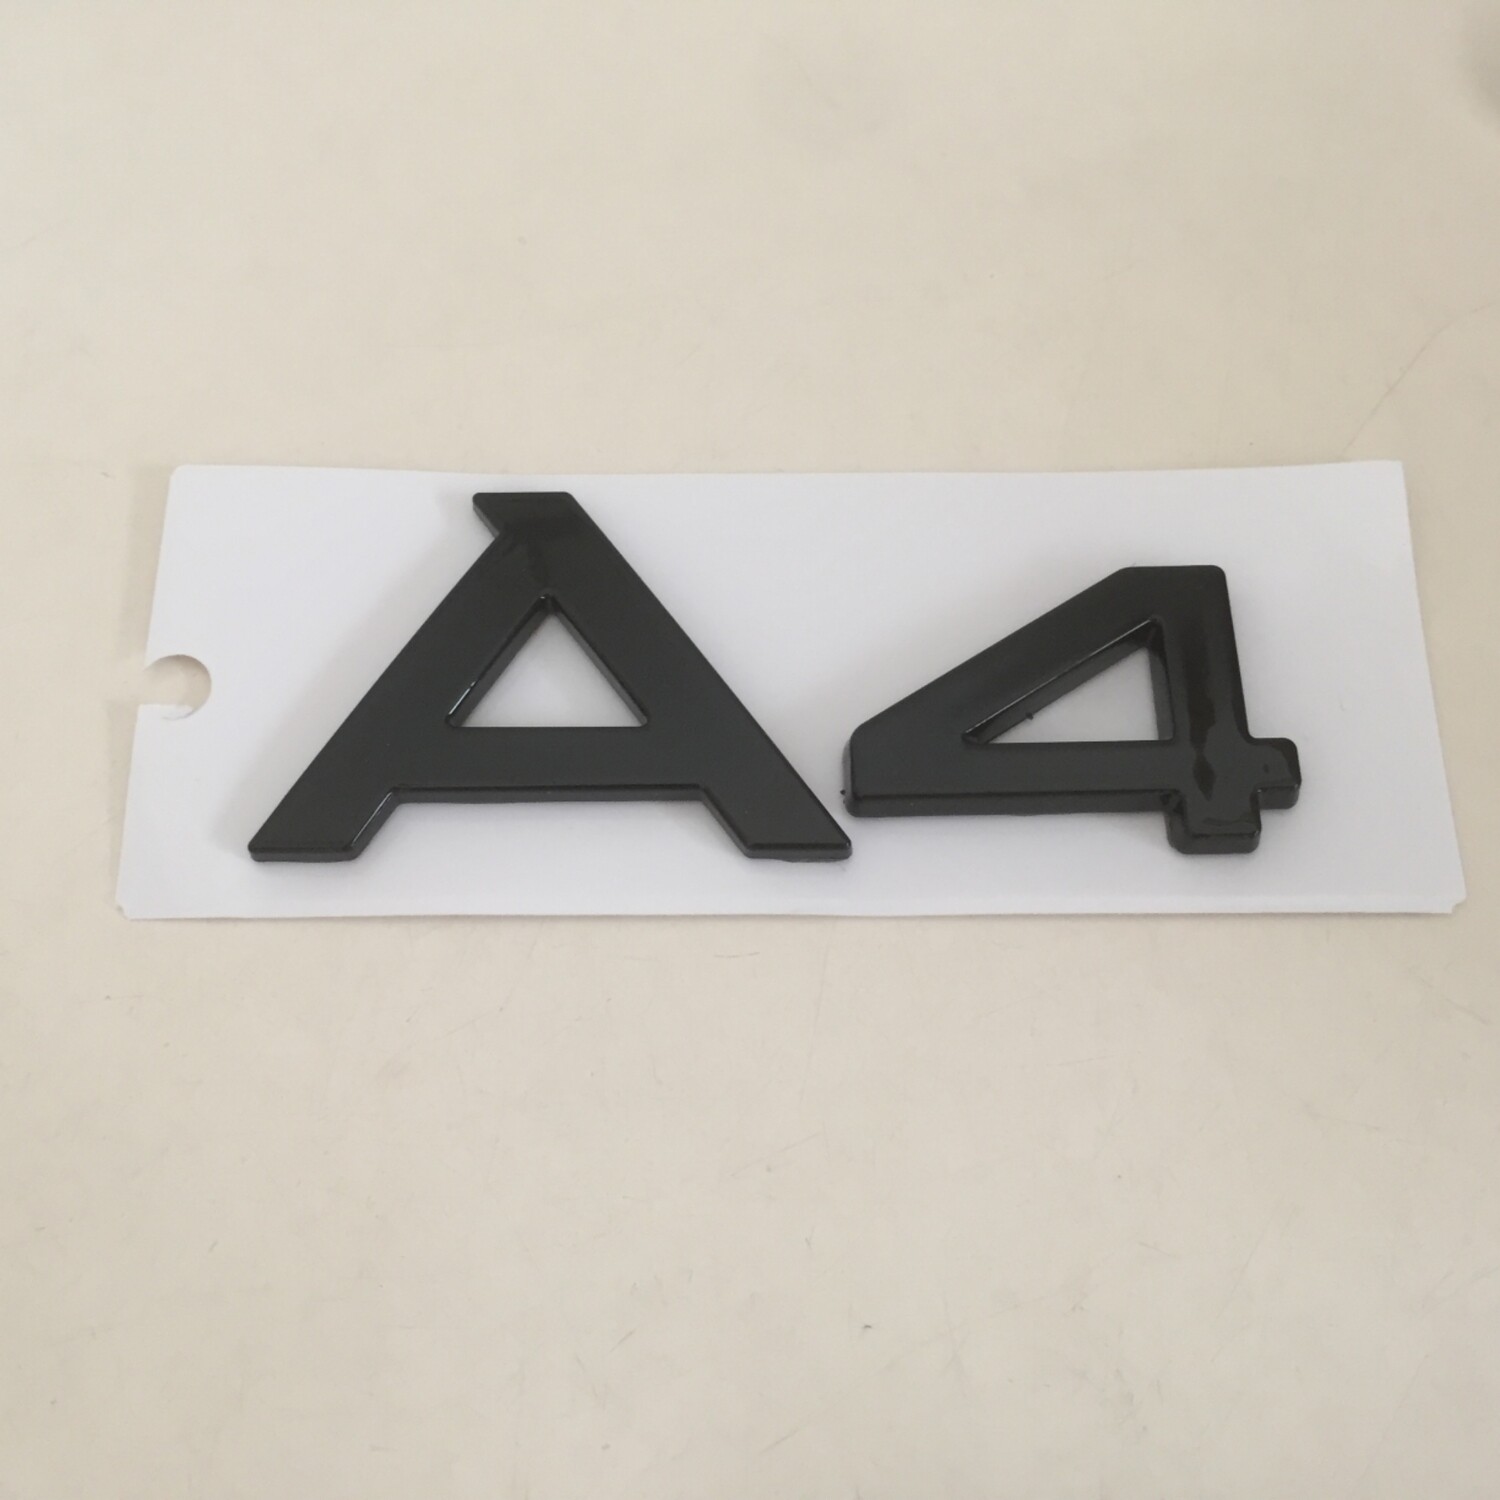 Audi A4 black replacement rear boot trunk badge emblem adhesive stick on